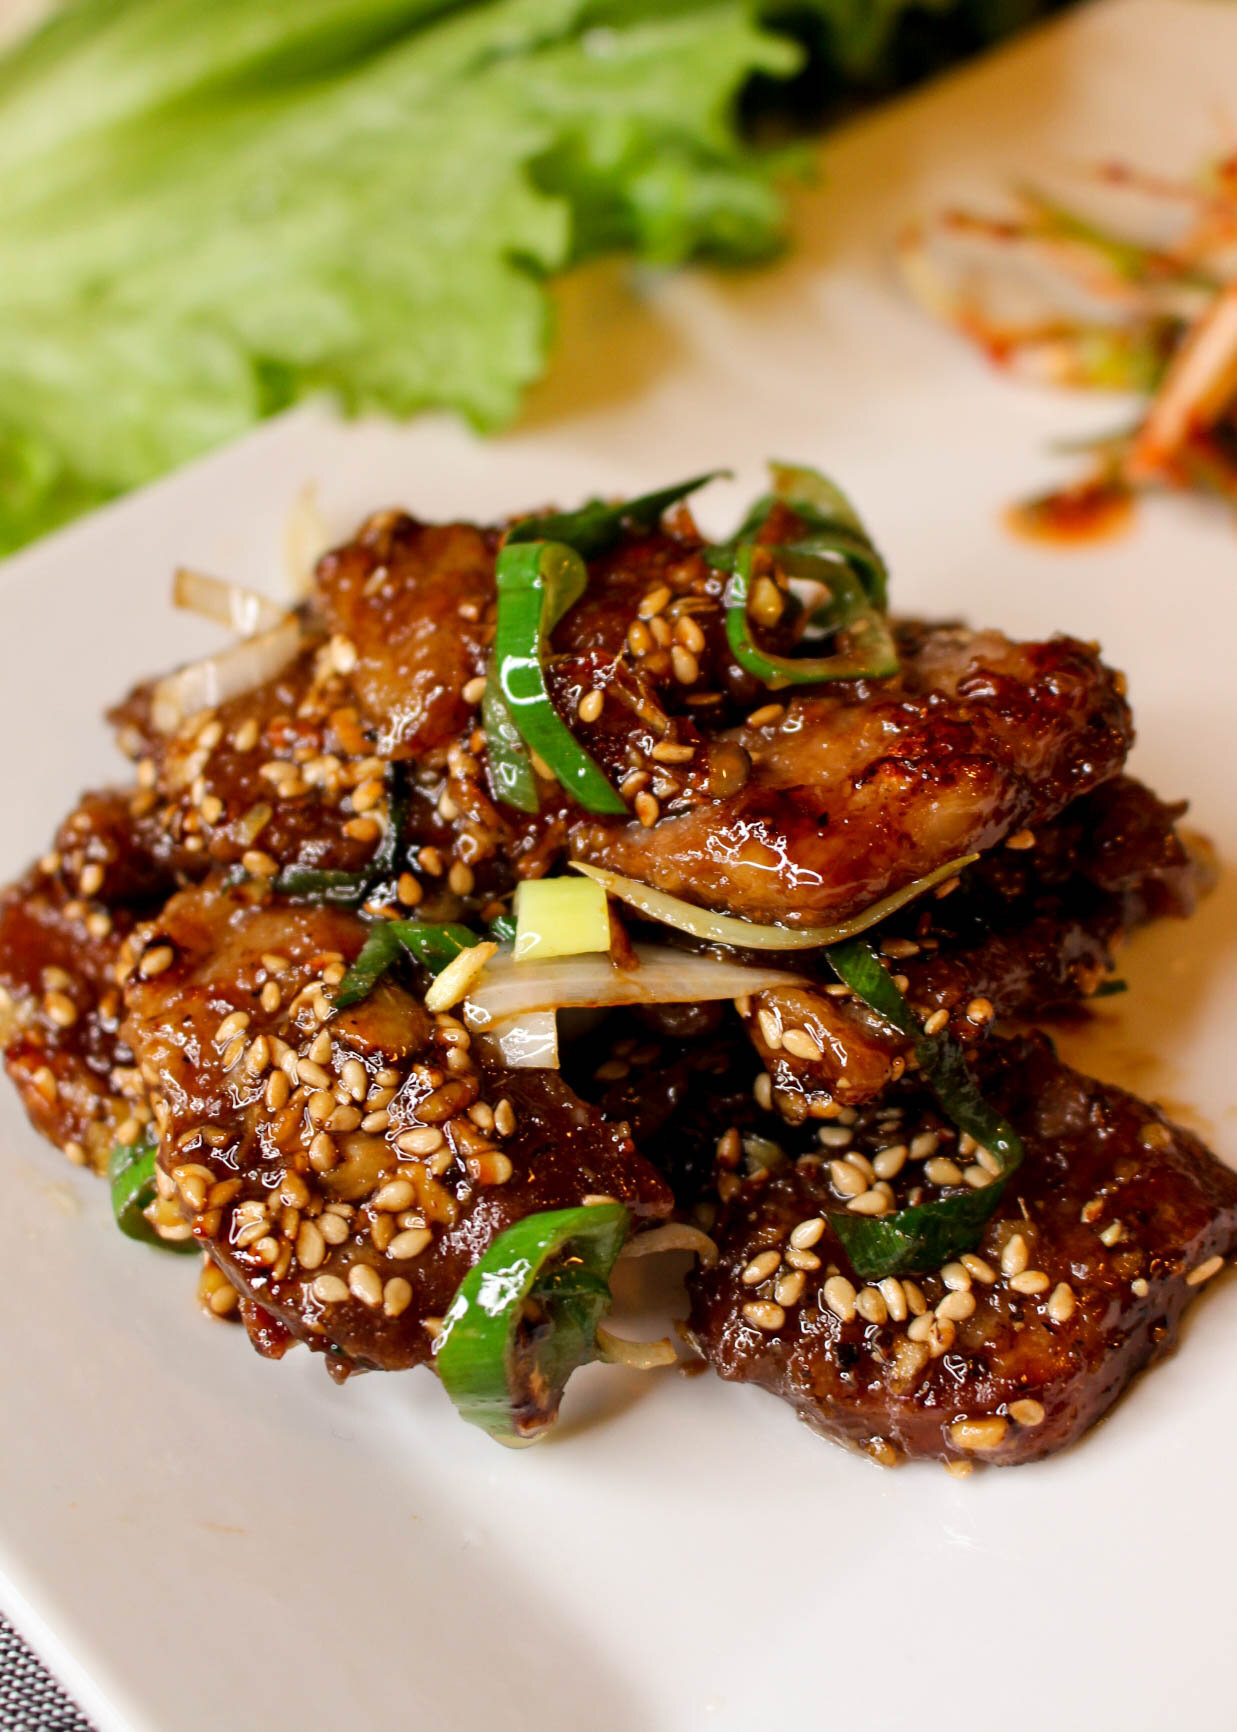 Soy-Braised Pork with green onion salad is delicious!